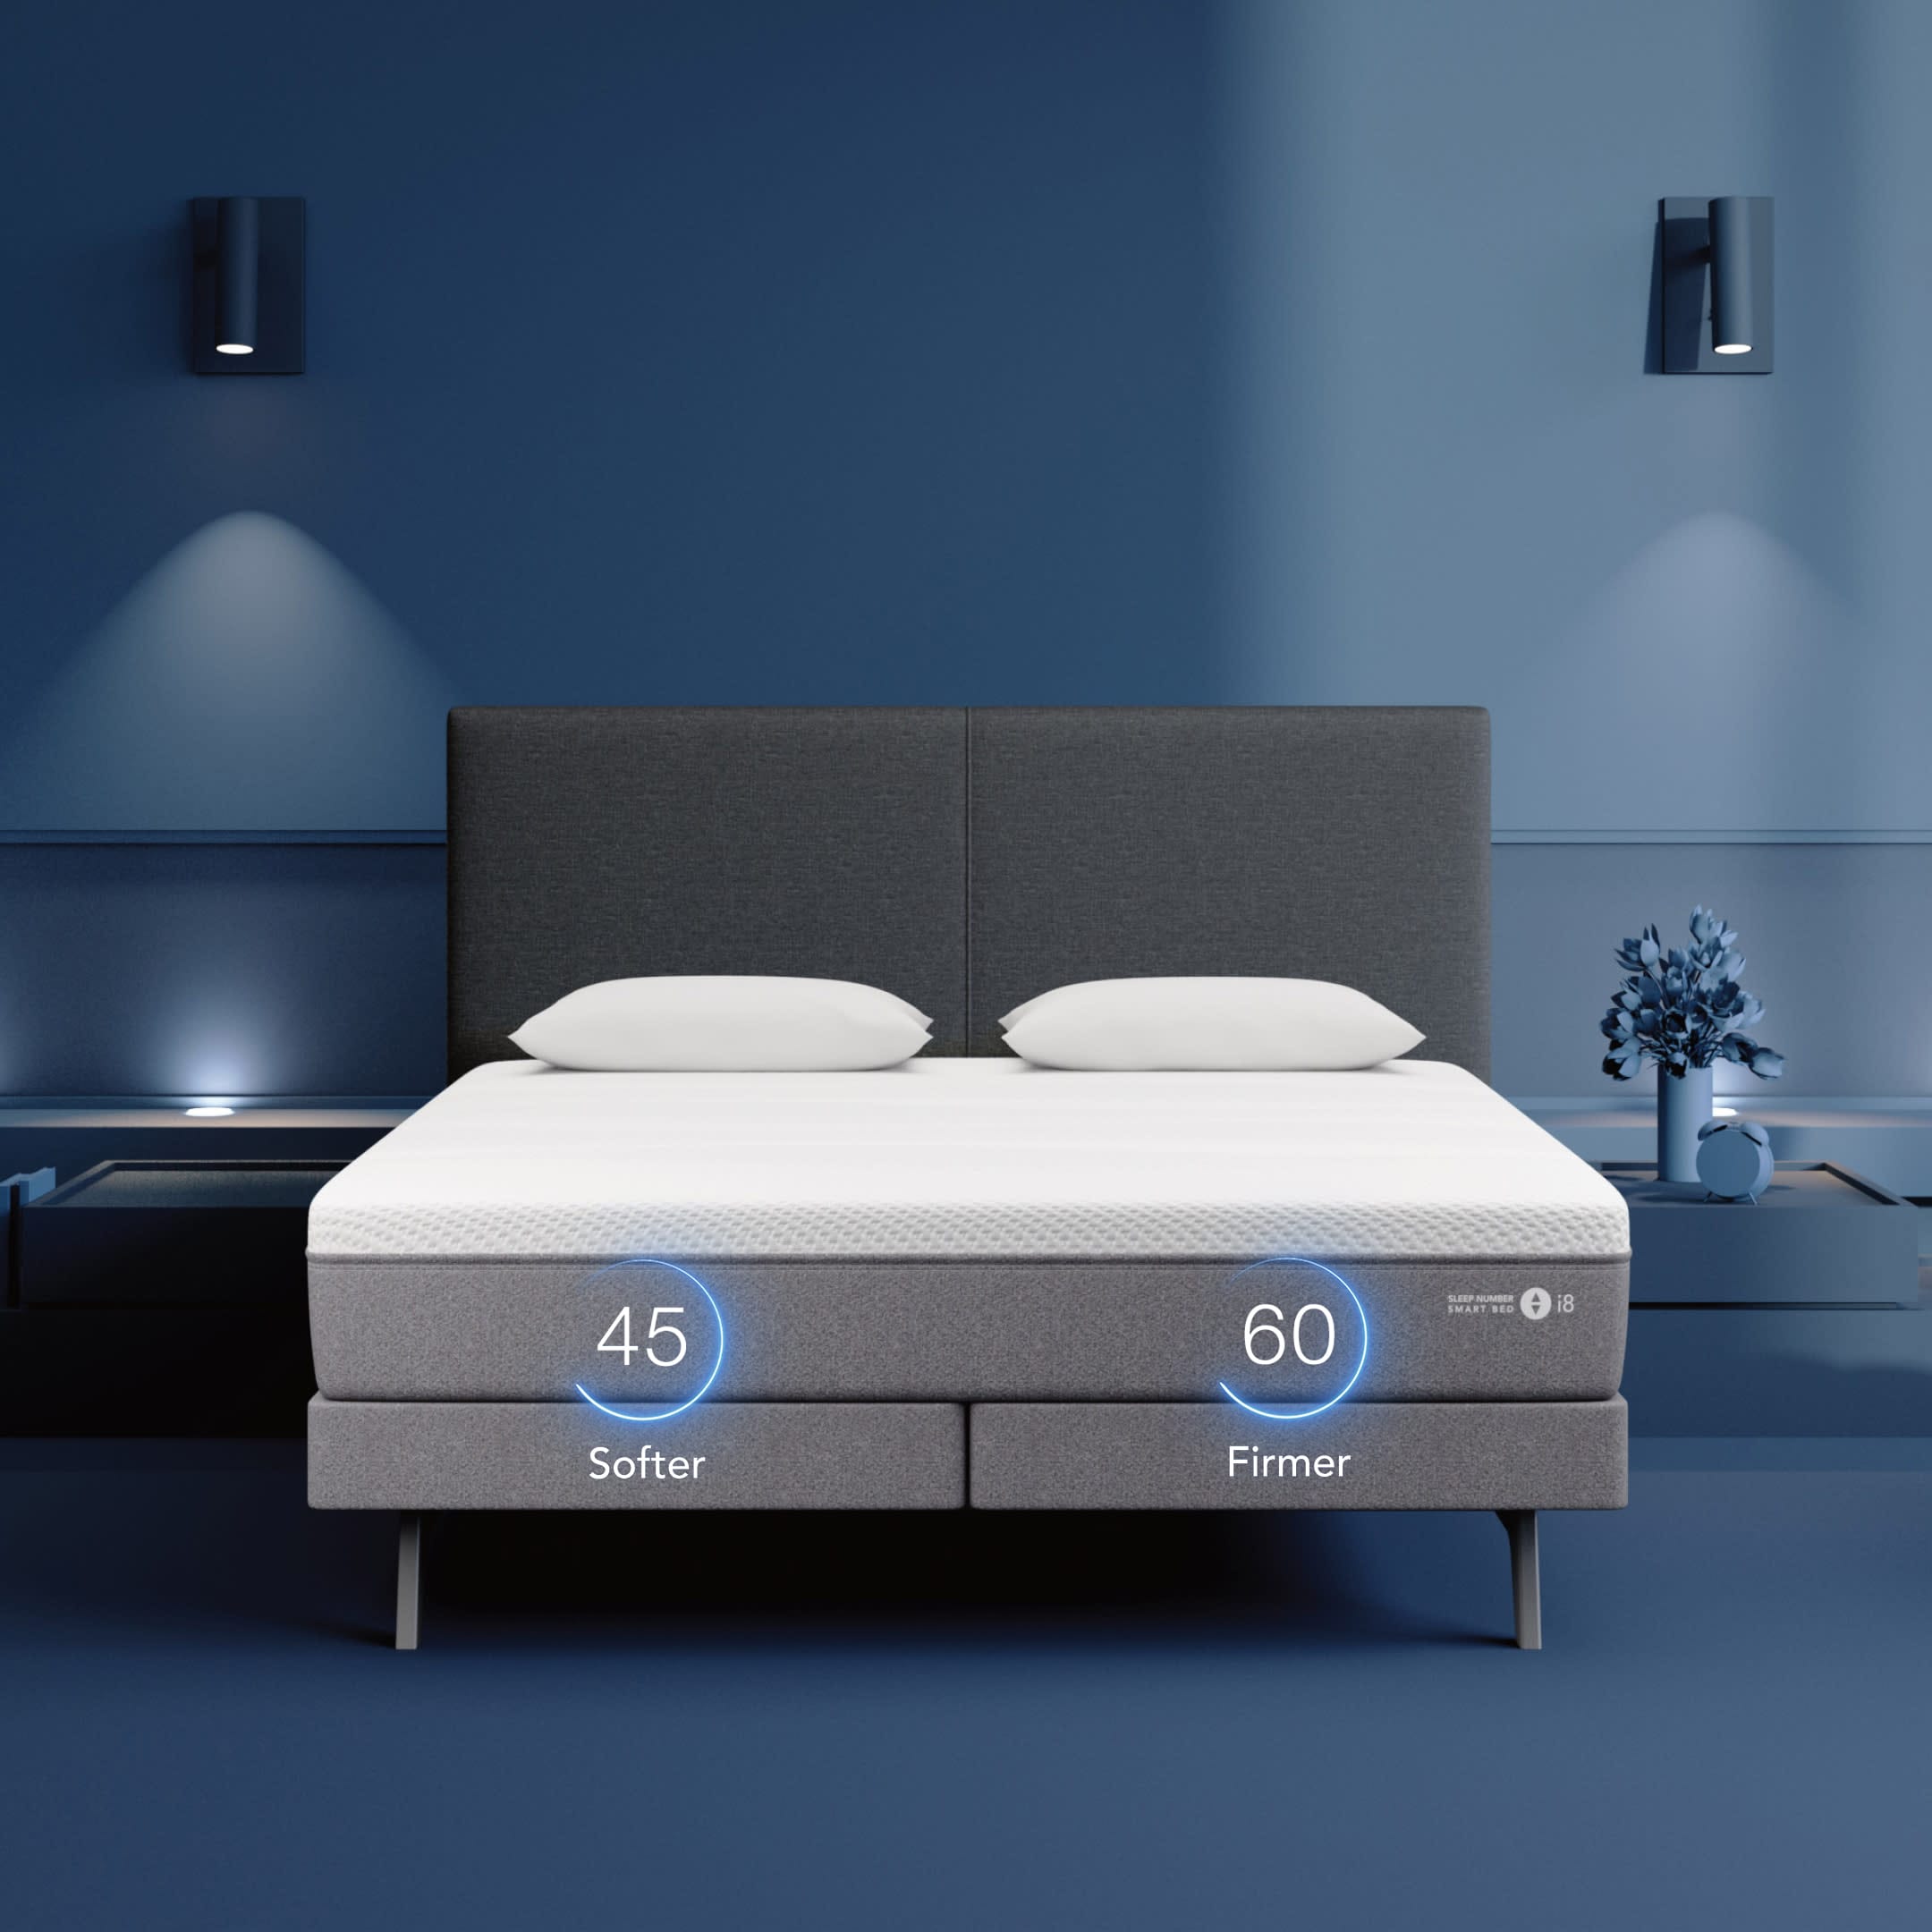 Top 10 Bed Accessories to Fall in Love in 2023